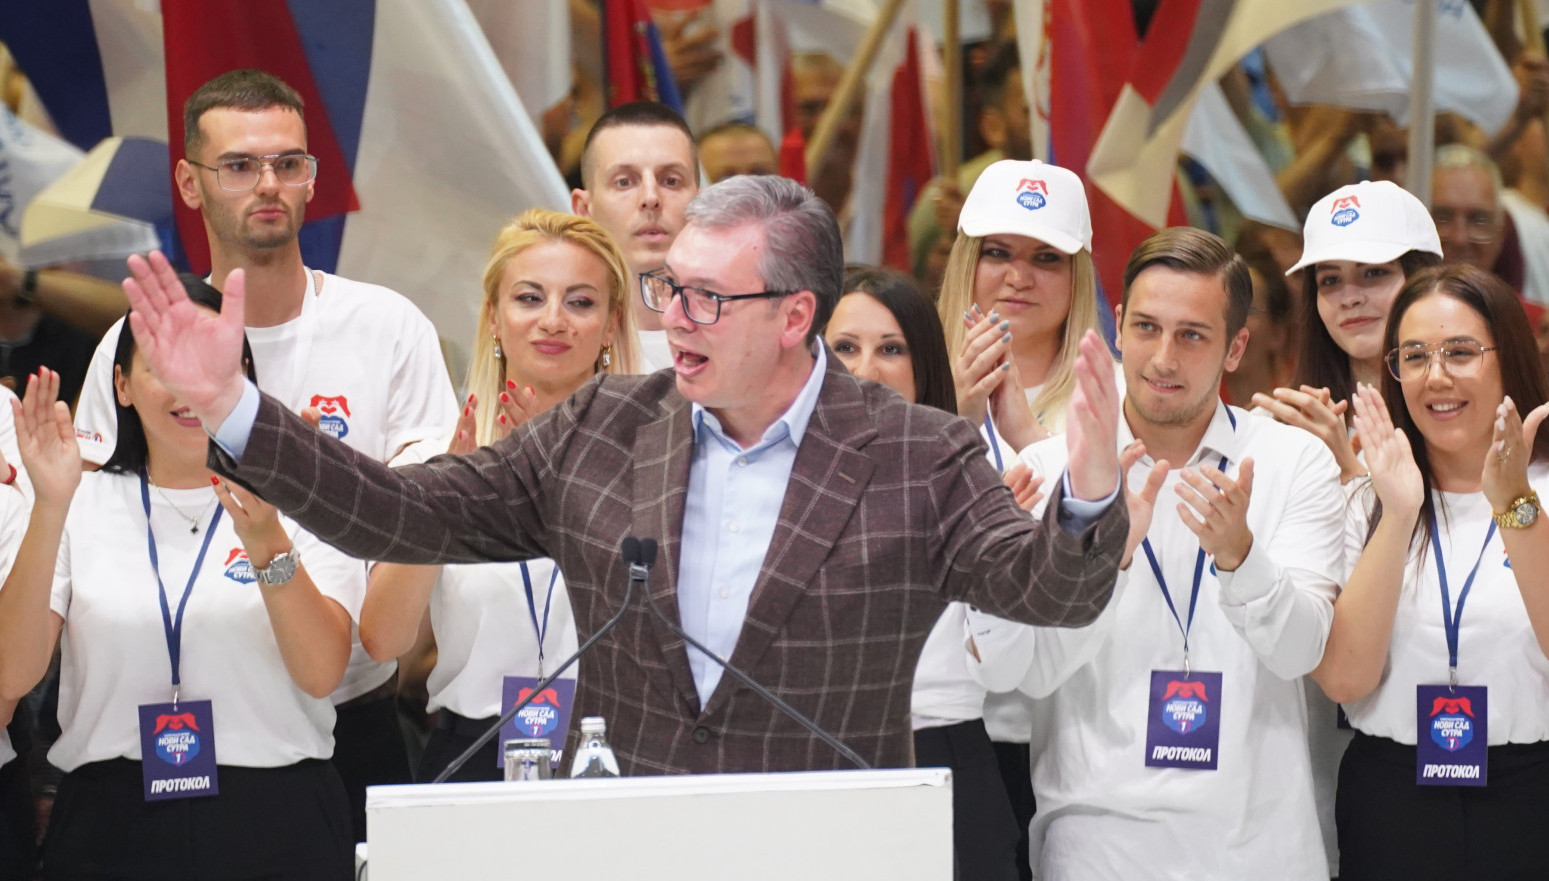 Vučić in crowded Spens: This team is like Real Madrid compared to others; I want you to fight for people